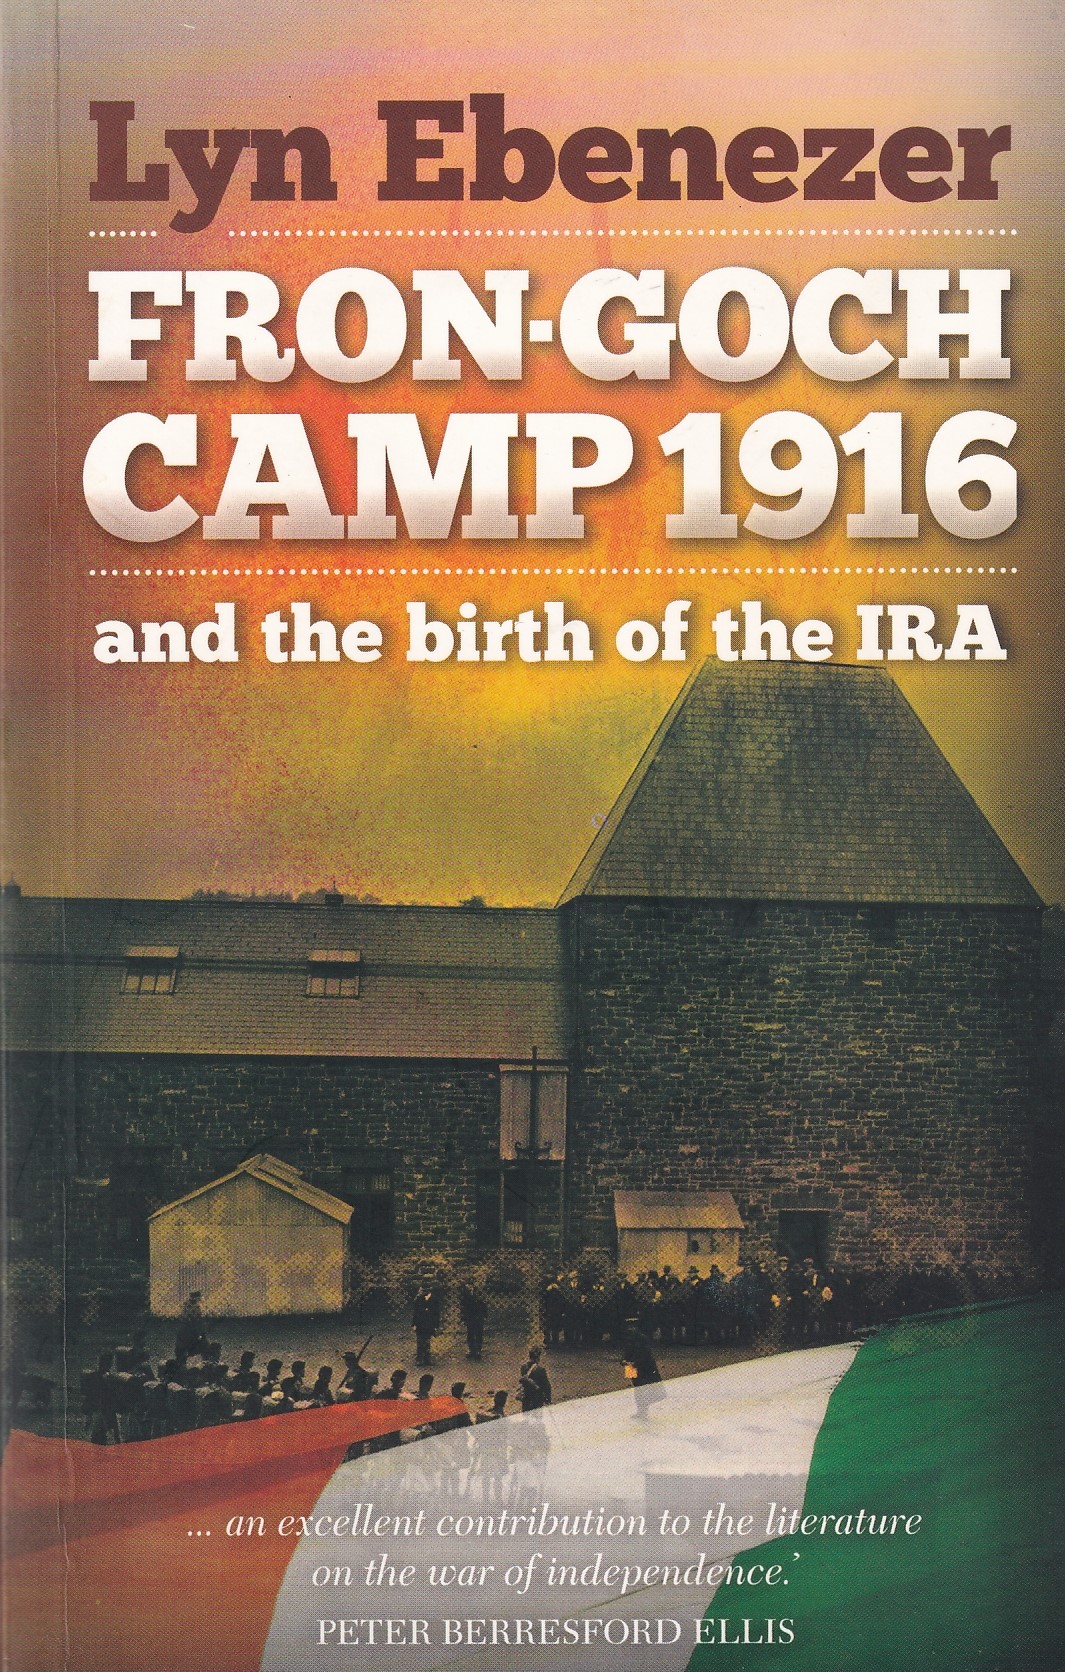 Frong-Goch Camp 1916 and the birth of the IRA | Lyn Ebenezer | Charlie Byrne's